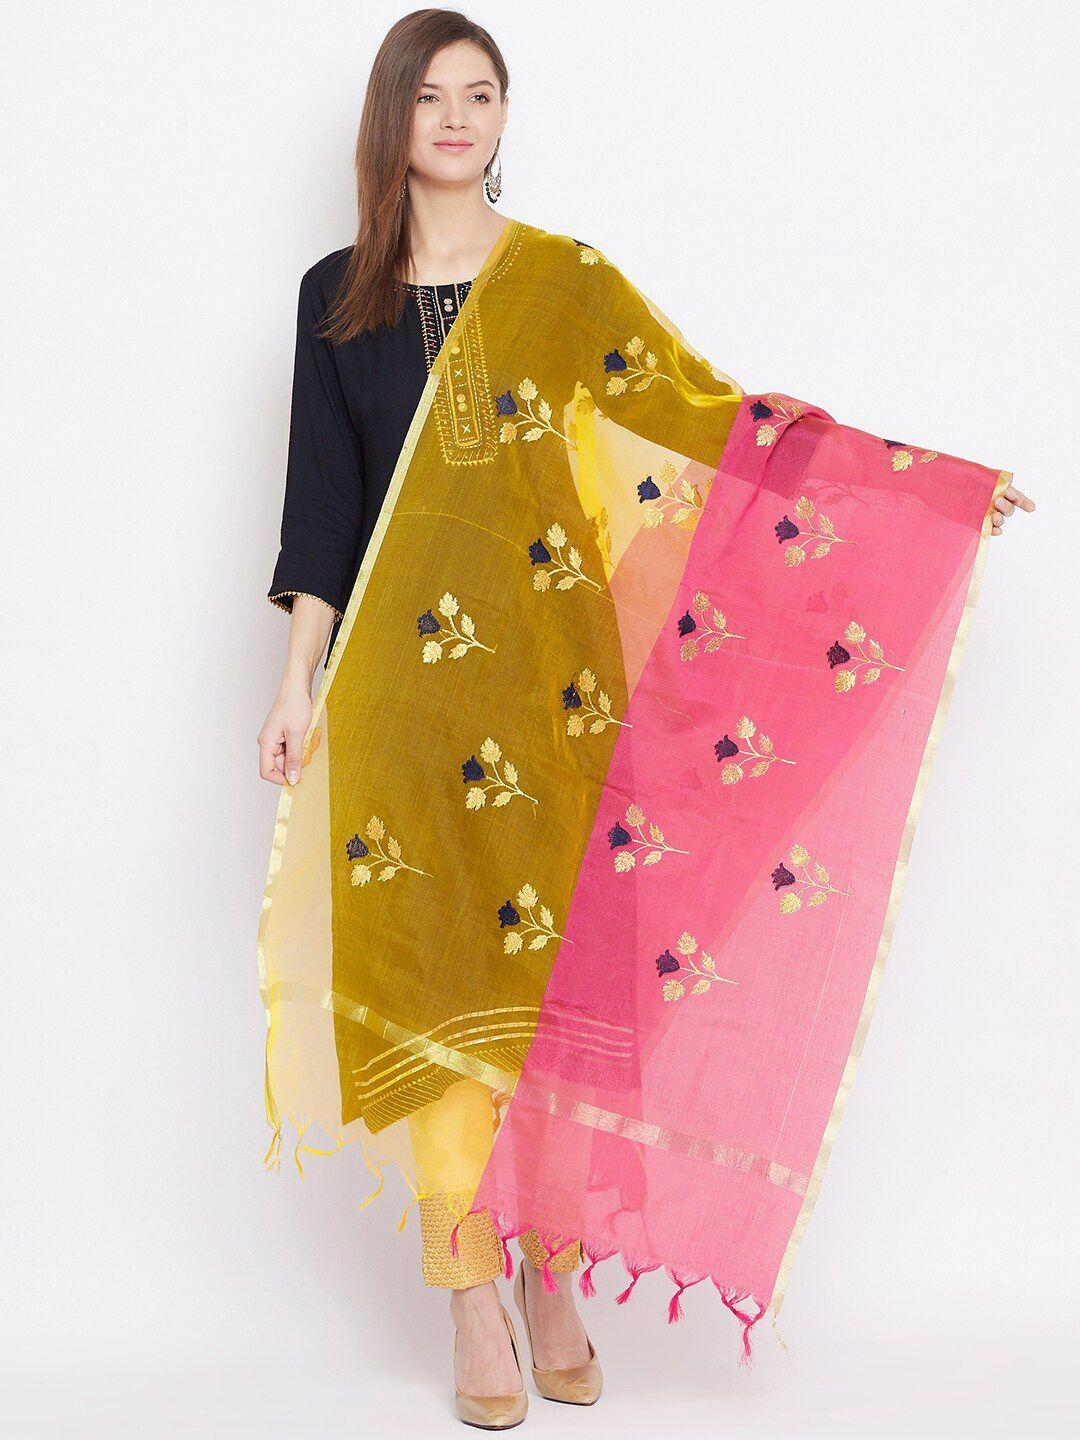 clora creation women yellow & pink floral embroidered dupatta